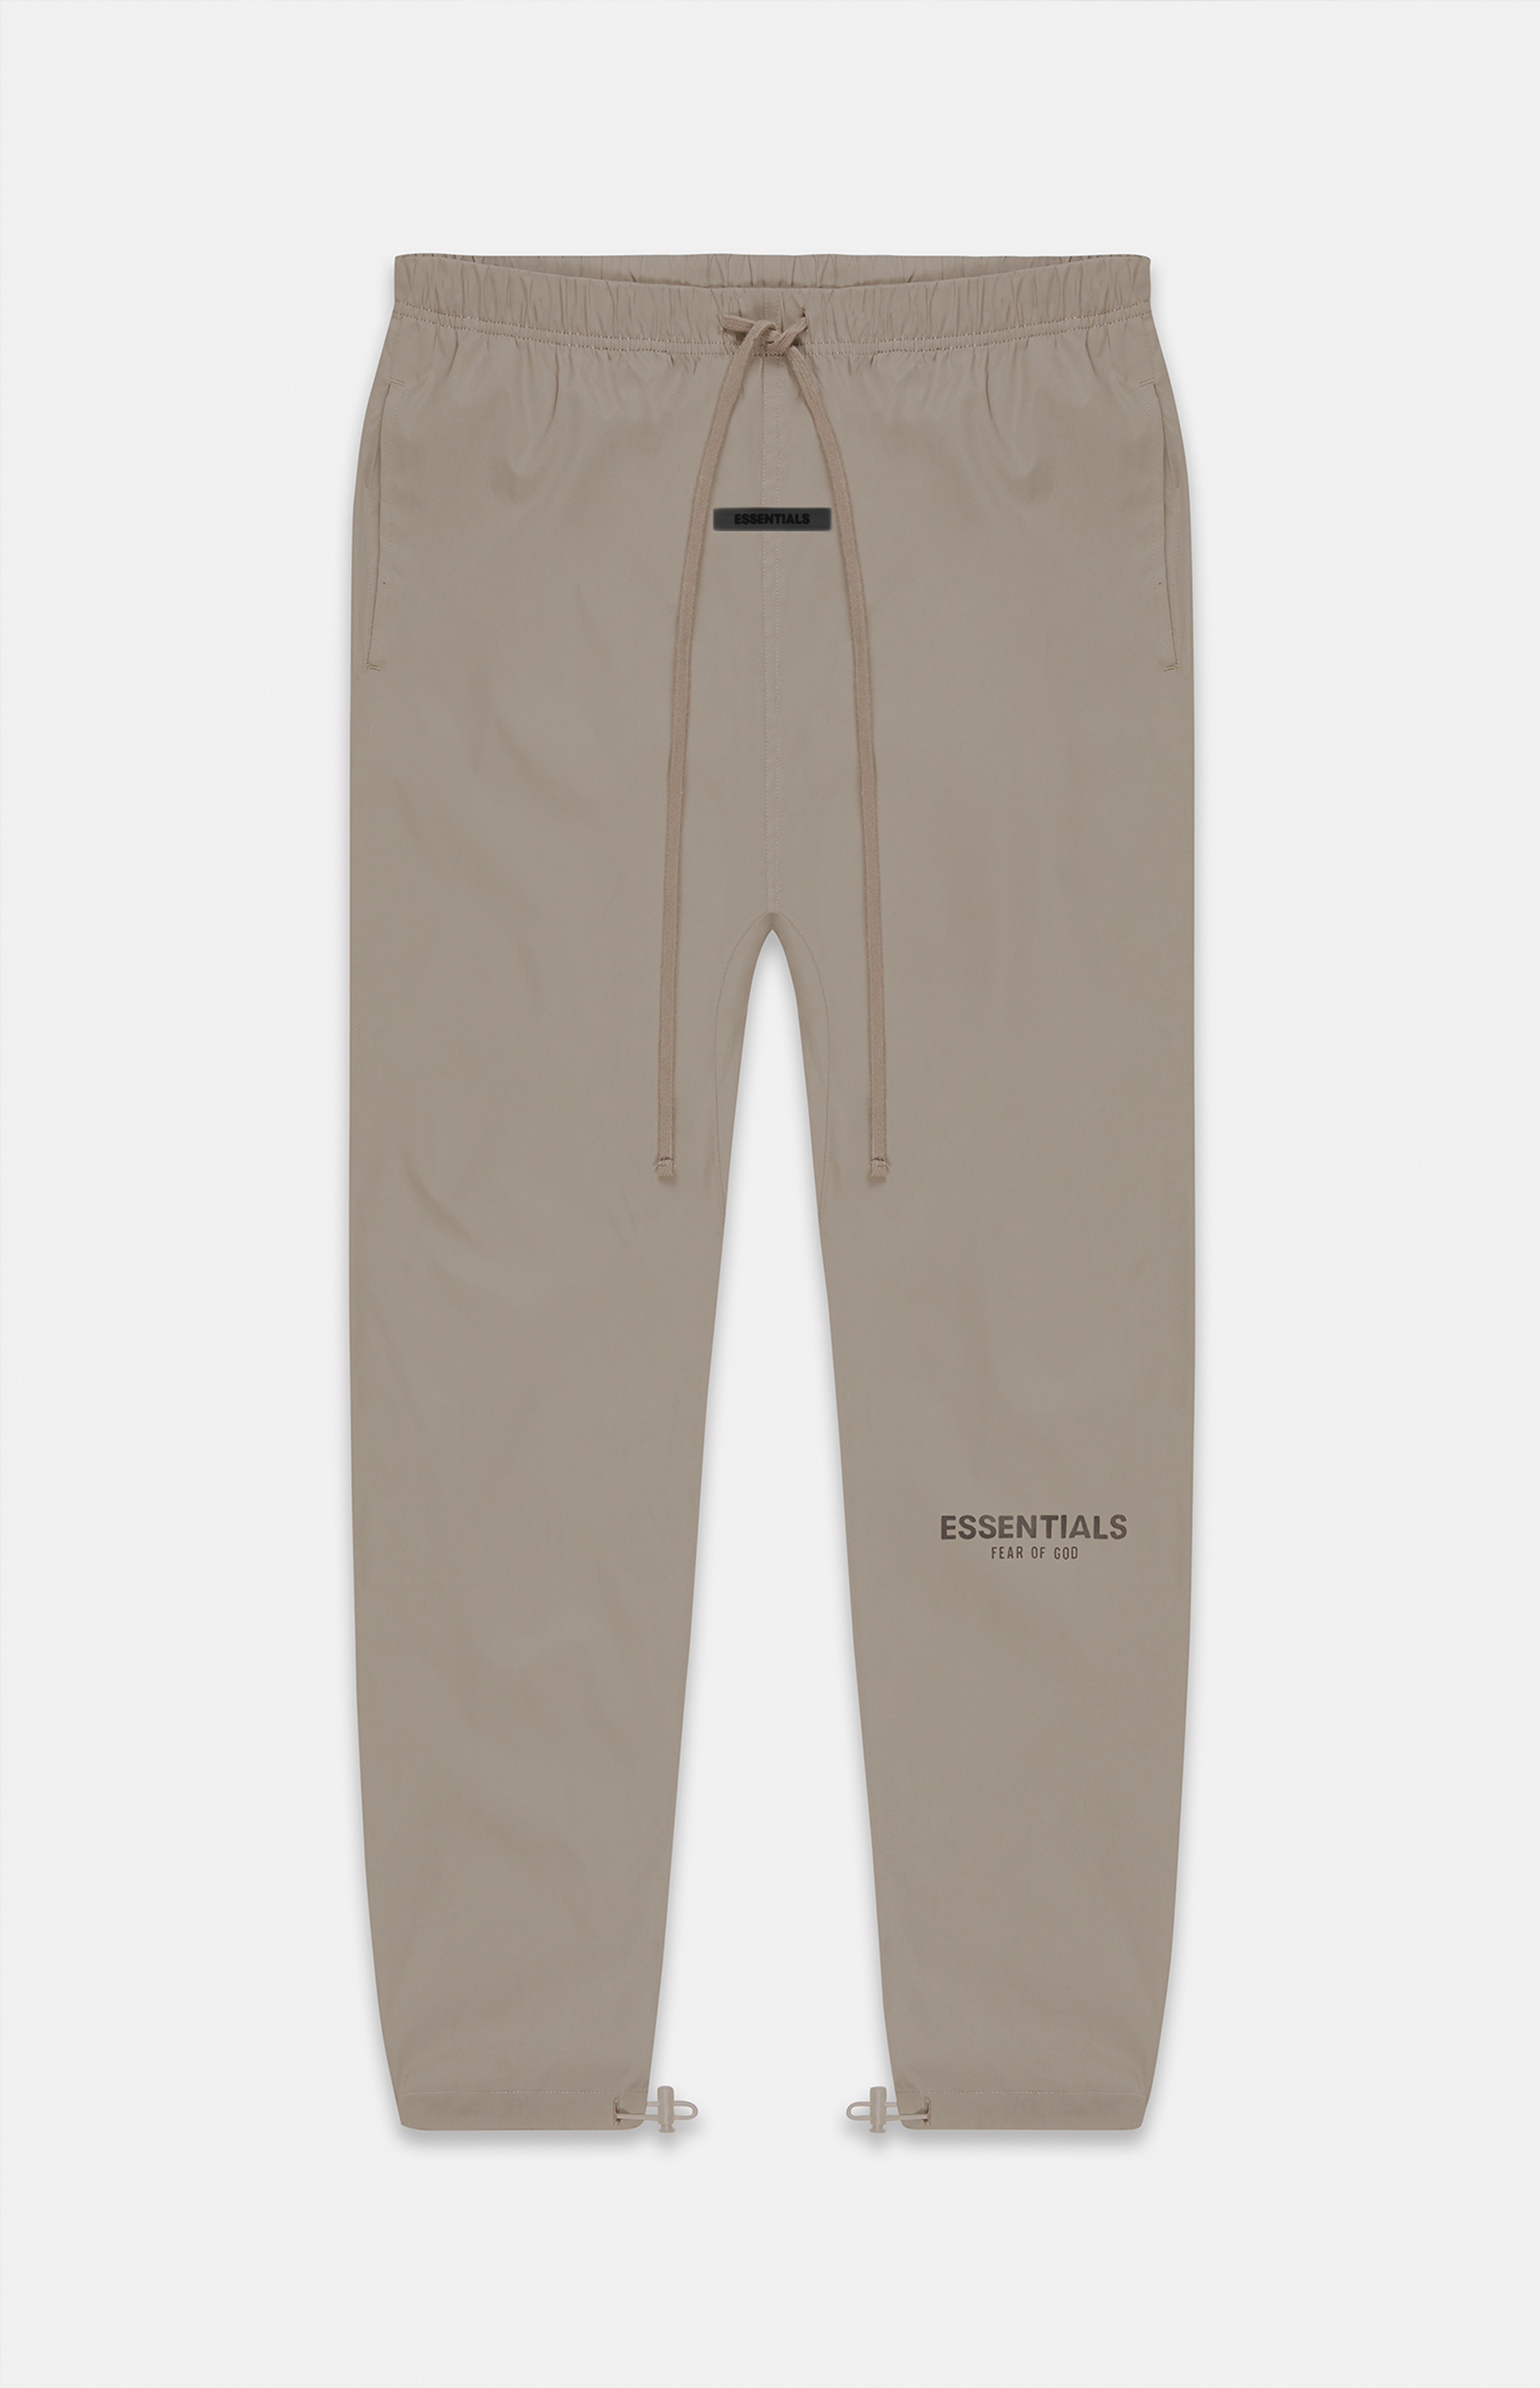 Kids Taupe Track Pants by Fear of God ESSENTIALS on Sale